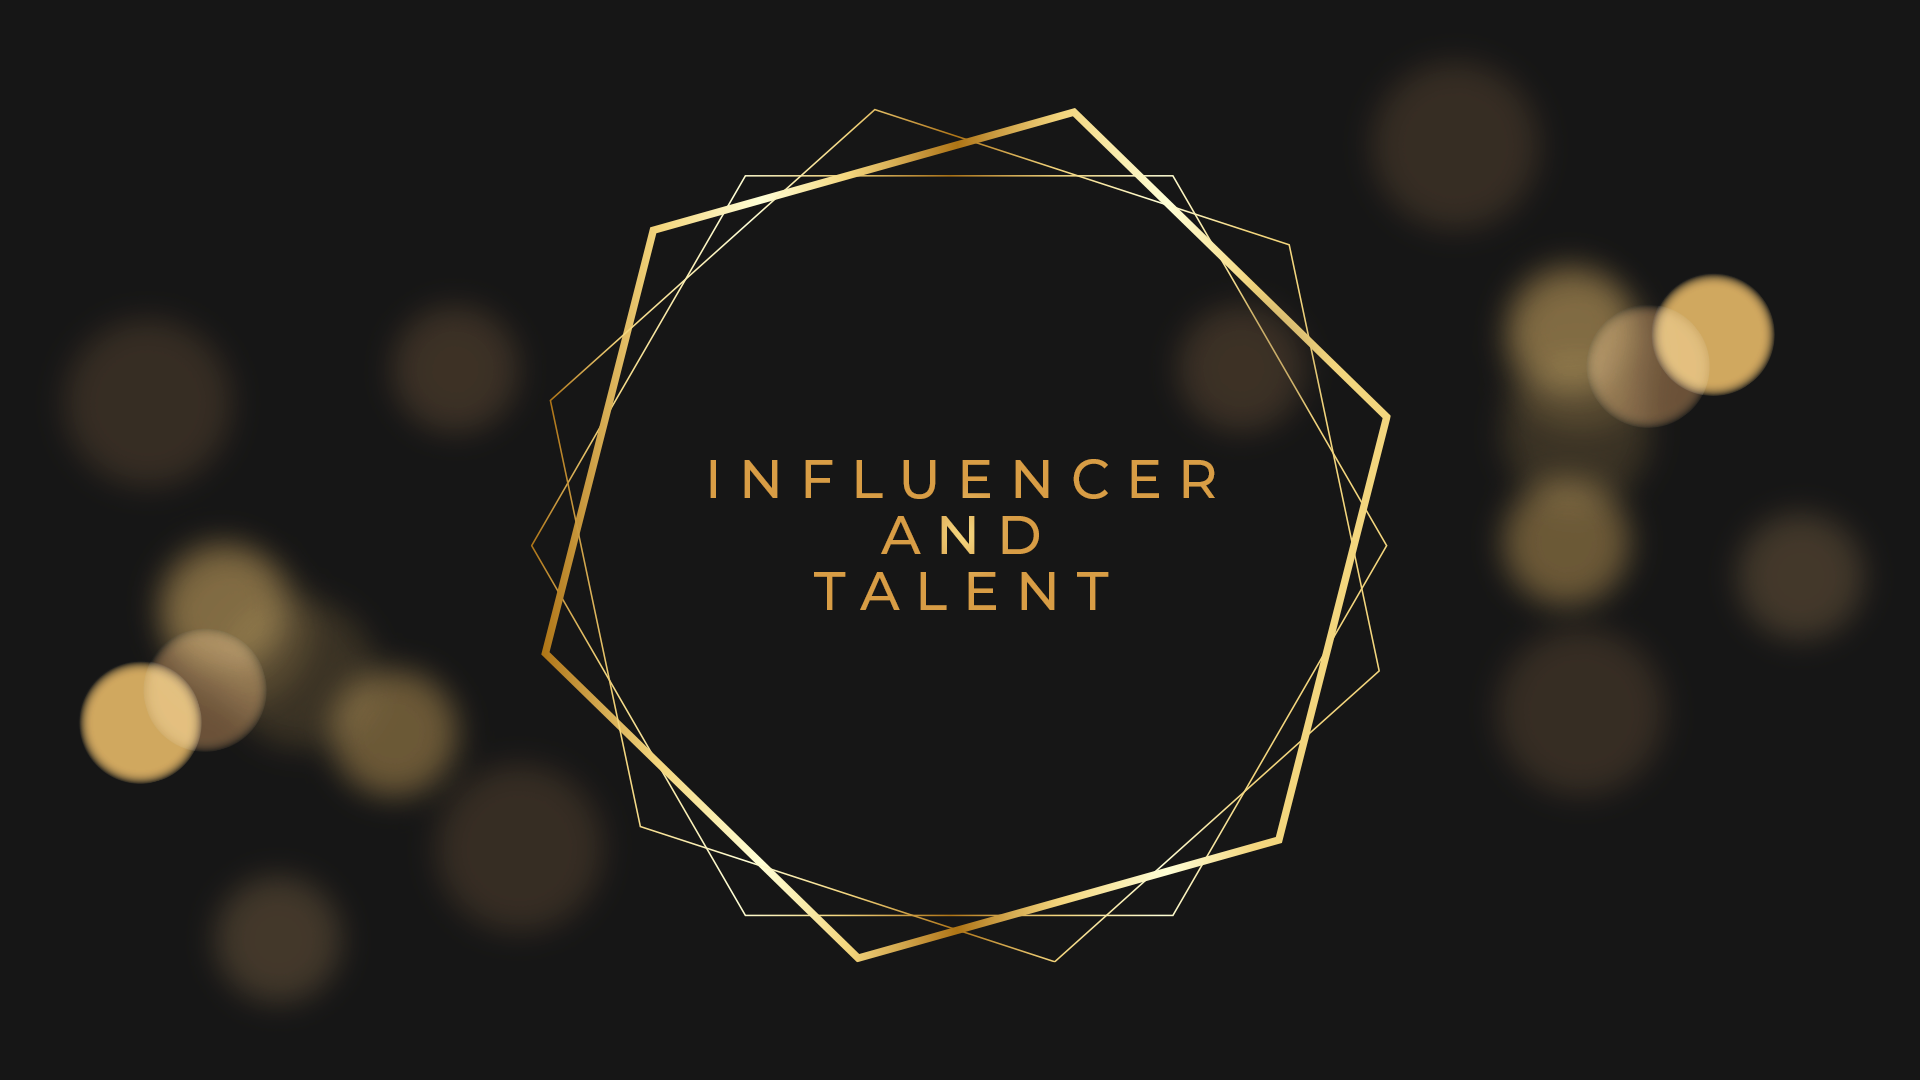 Influencer and Talent